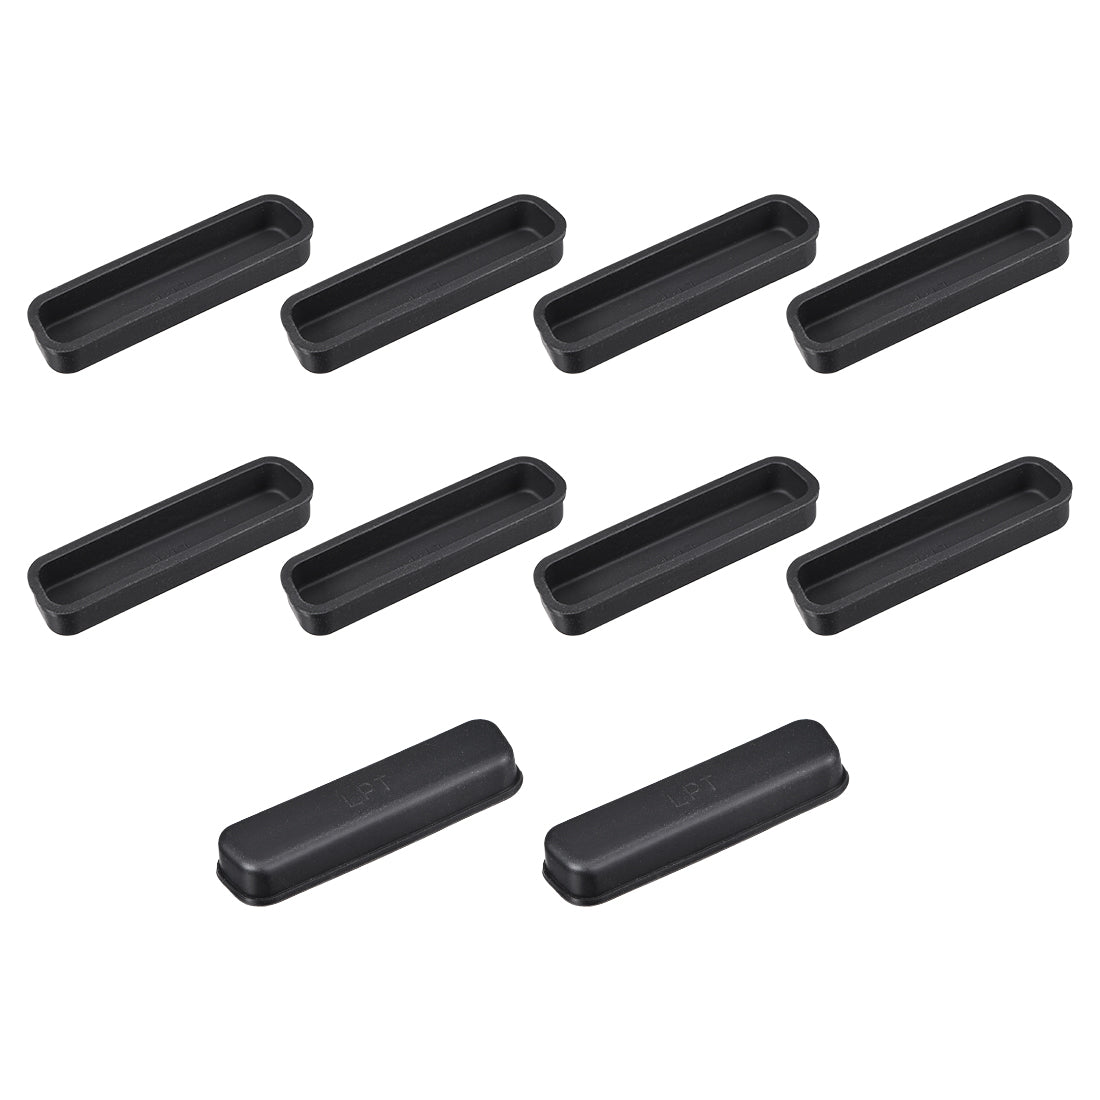 uxcell Uxcell Silicone DB-25 Port Parallel Printer LPT Anti-Dust Stopper Cap Cover Black 10pcs